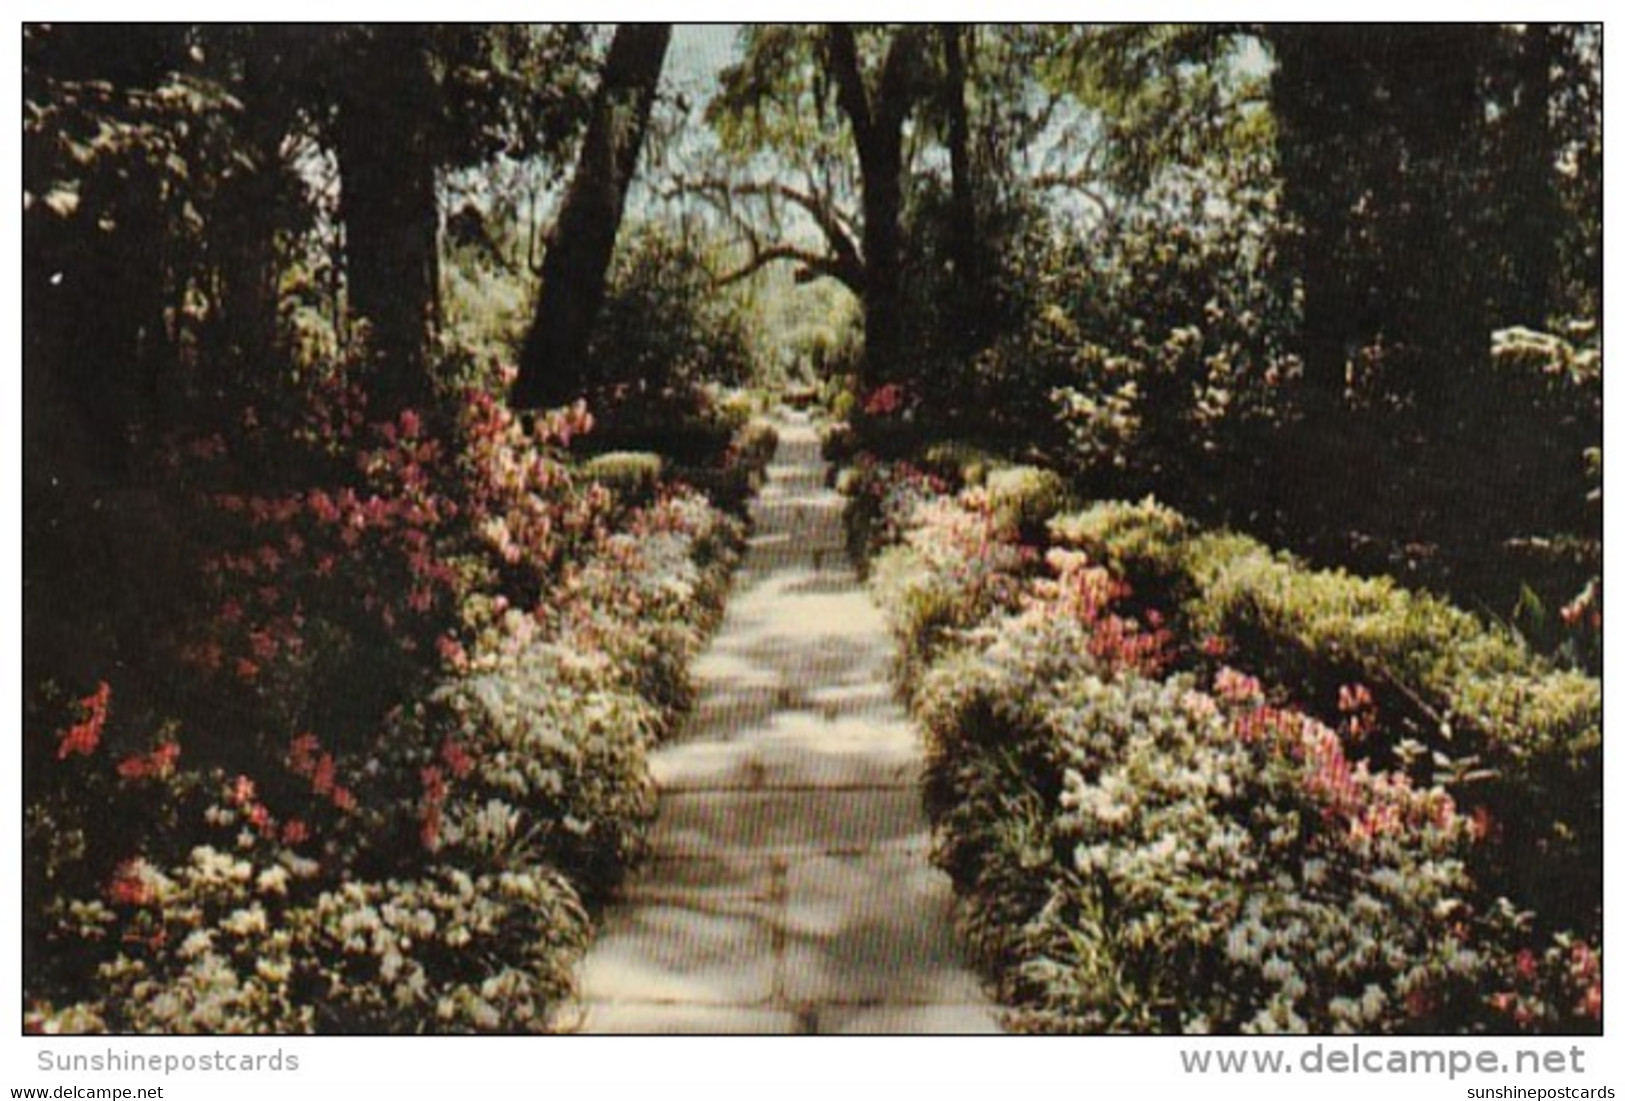 Alabama Mobile Bellingrath Gardens Path Lined With Camellias And Azaleas - Mobile